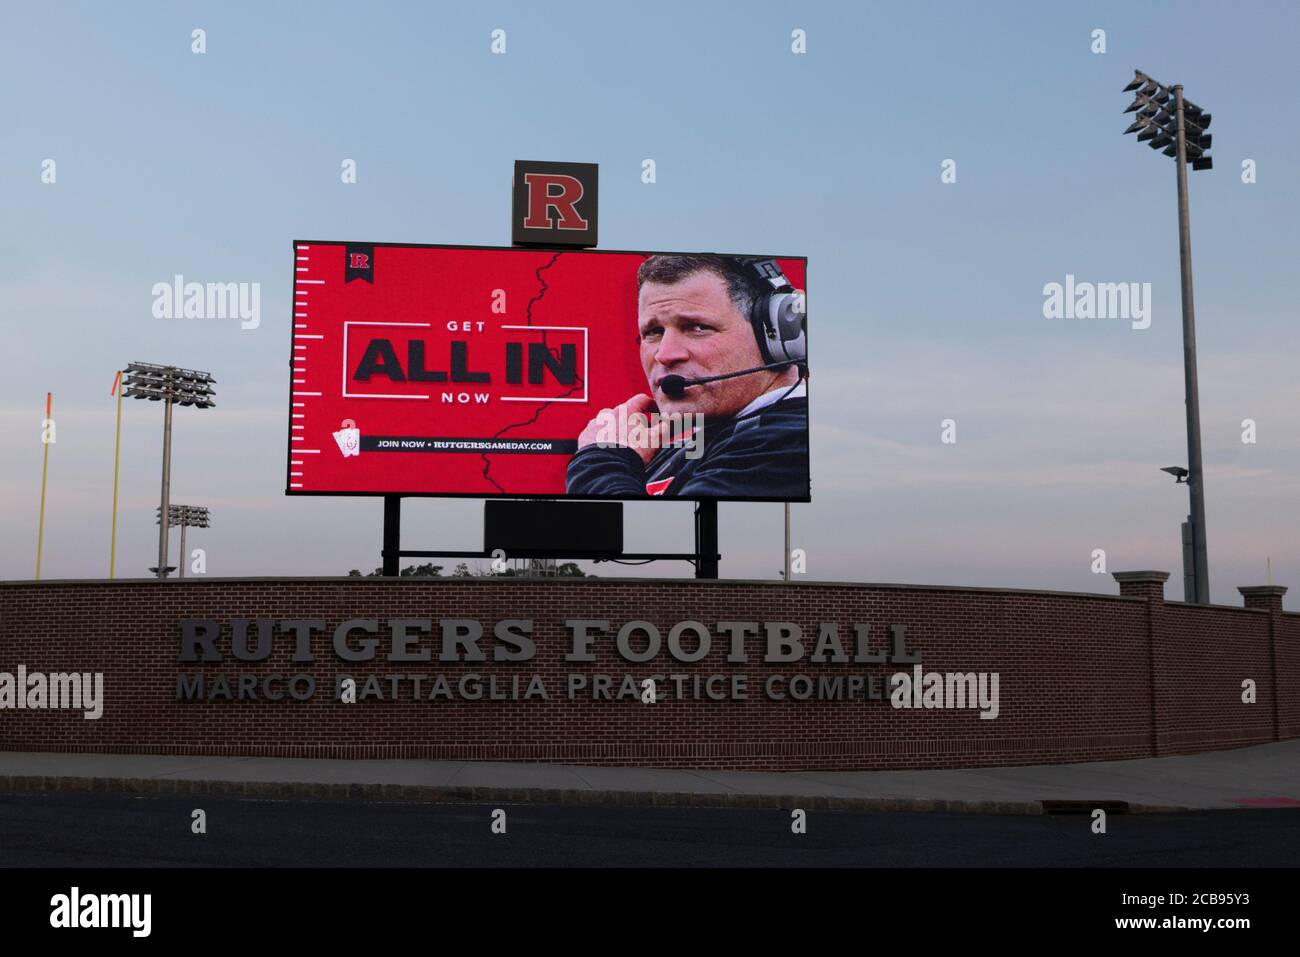 Piscataway, New Jersey, USA. 11th Aug, 2020. Rutgers Head coach GREG SCHIANO appears on a billboard at Rutgers football practice field in Piscataway, New Jersey. Rutgers, a member of the Big 10 Conference. The Big Ten Conference announced the postponement ofÂ the 2020-21 fall sports season, including all regular-season contests and Big Ten Championships and Tournaments, due to ongoing health and safety concerns related to the COVID-19 pandemic Credit: Brian Branch Price/ZUMA Wire/Alamy Live News Stock Photo